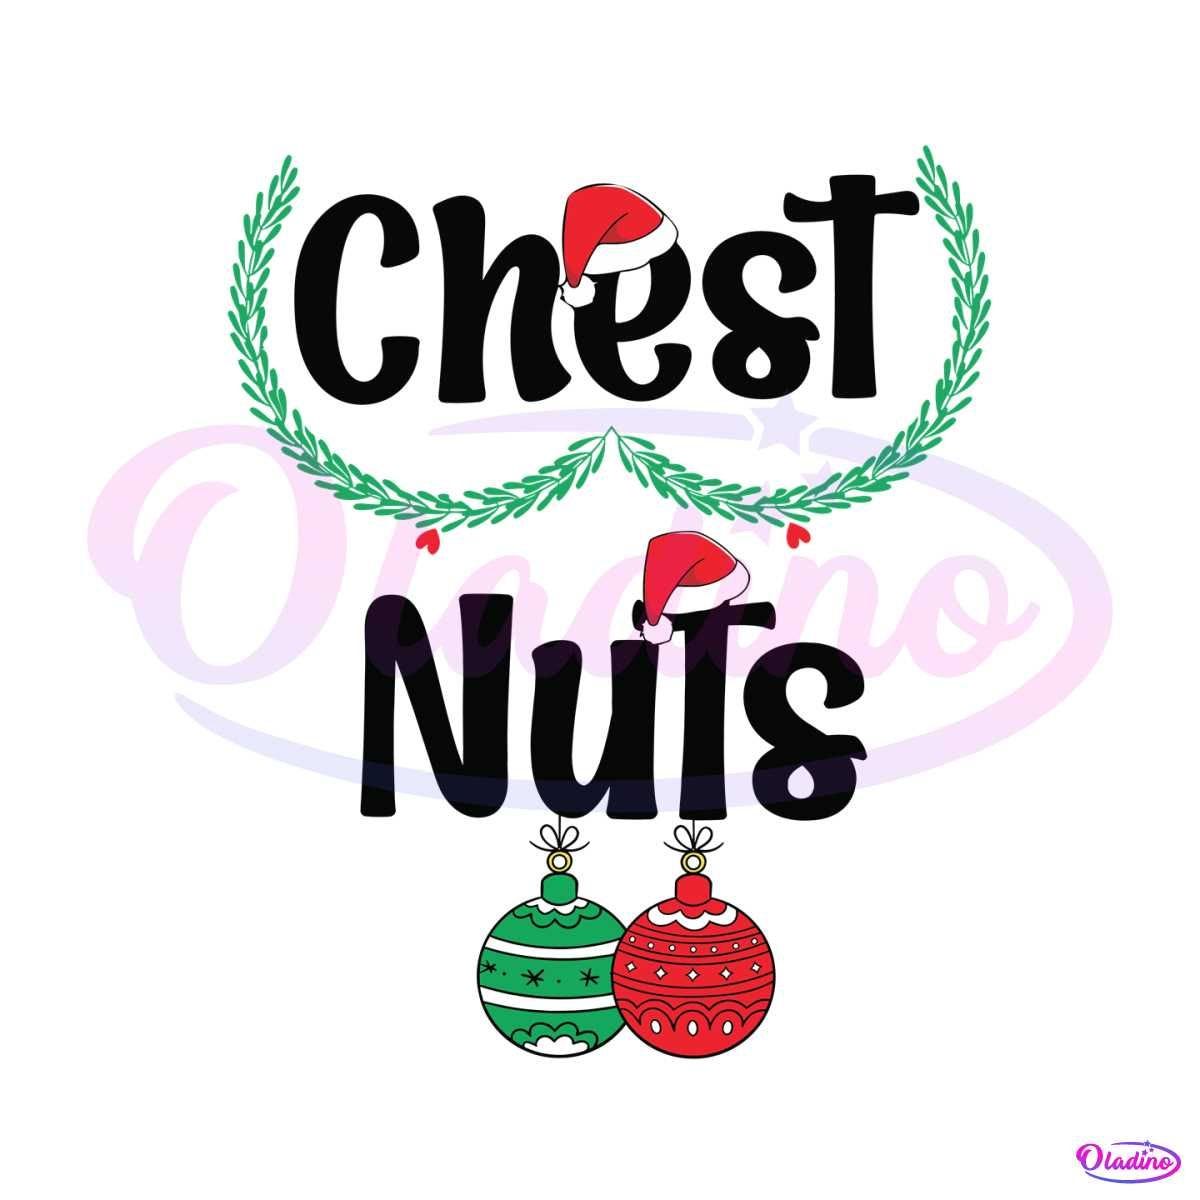 Chest Nuts Christmas Balls Couples SVG